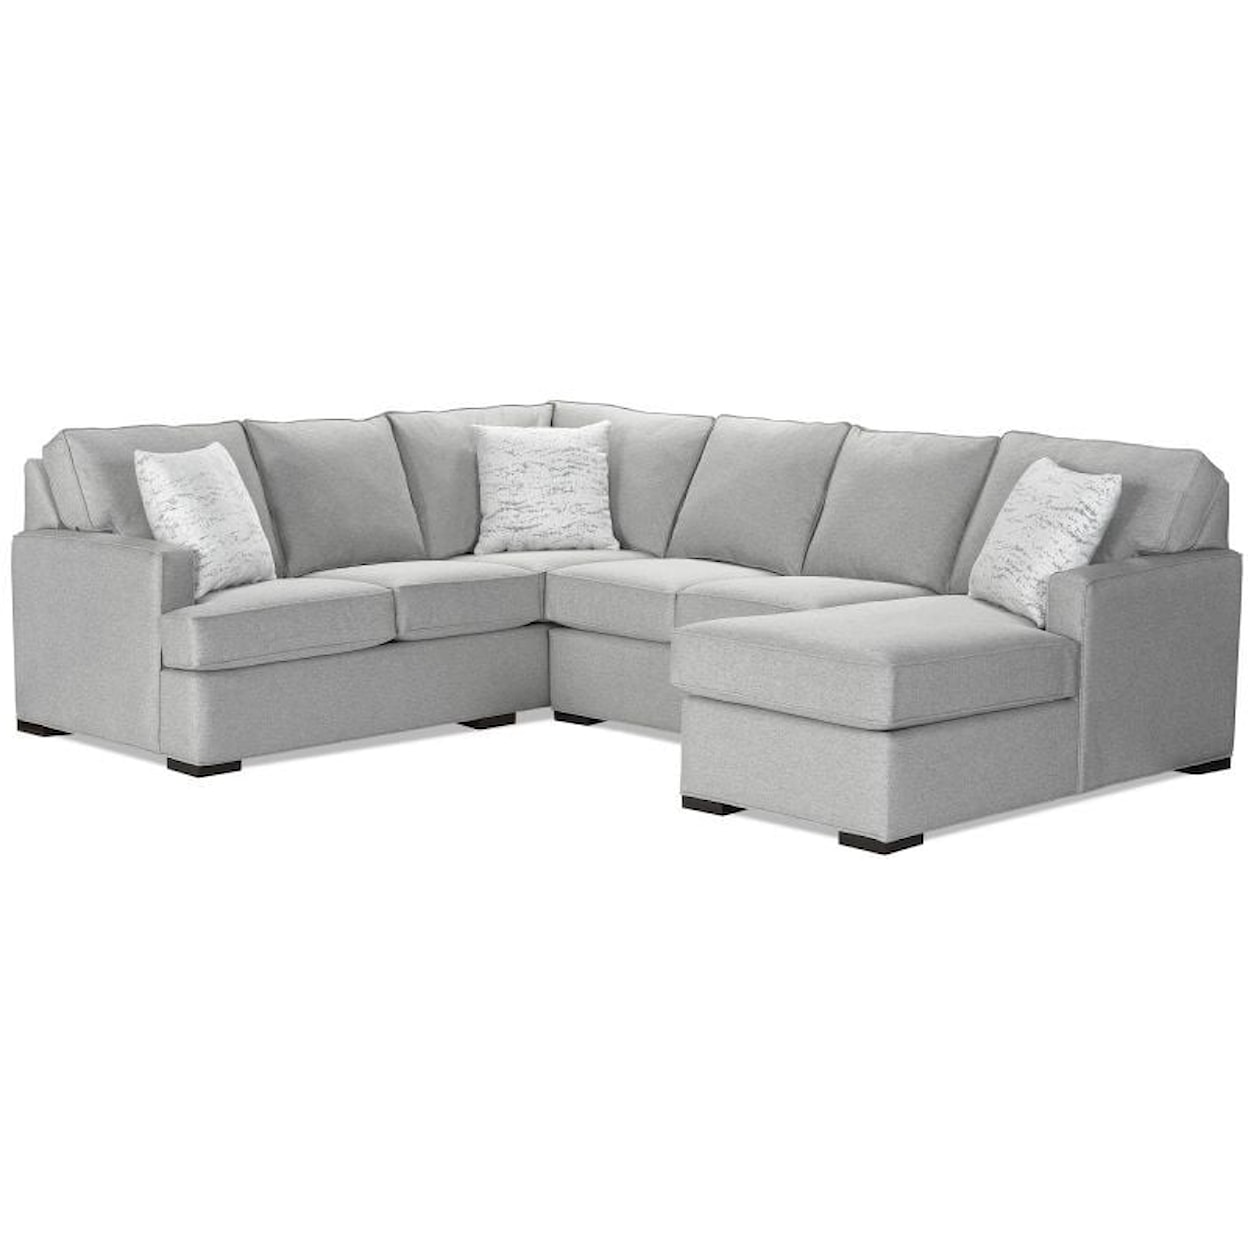 Lancer 3720 Sectional Group 3-Piece Sectional Sofa